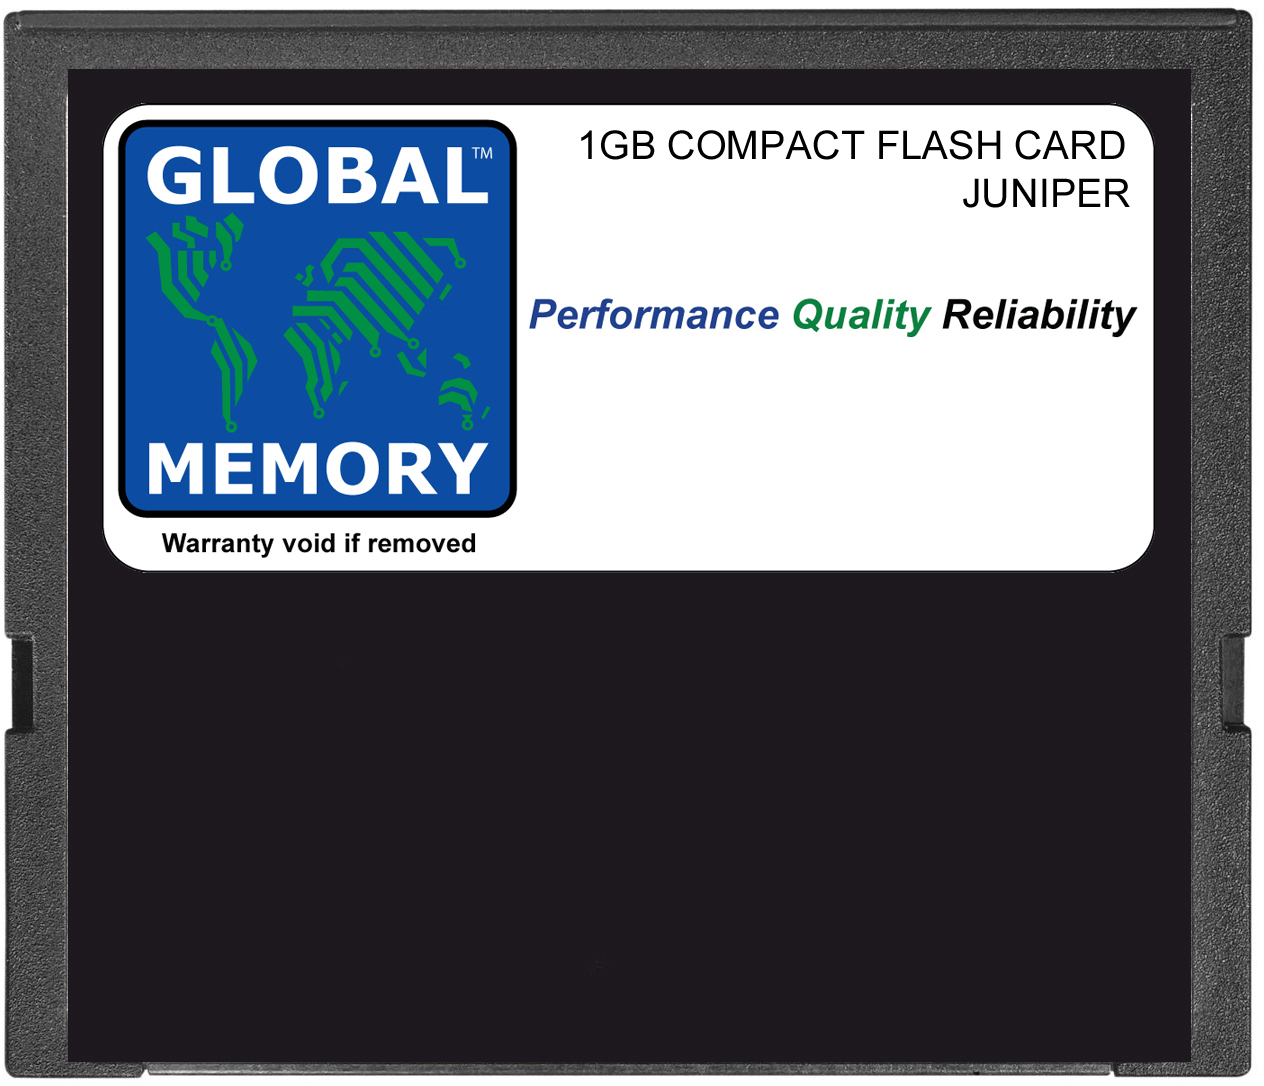 1GB COMPACT FLASH CARD MEMORY FOR JUNIPER RE-5.0 / RE-400 / RE-850 ROUTING ENGINES (CF-UPG2-1G-S) - Click Image to Close